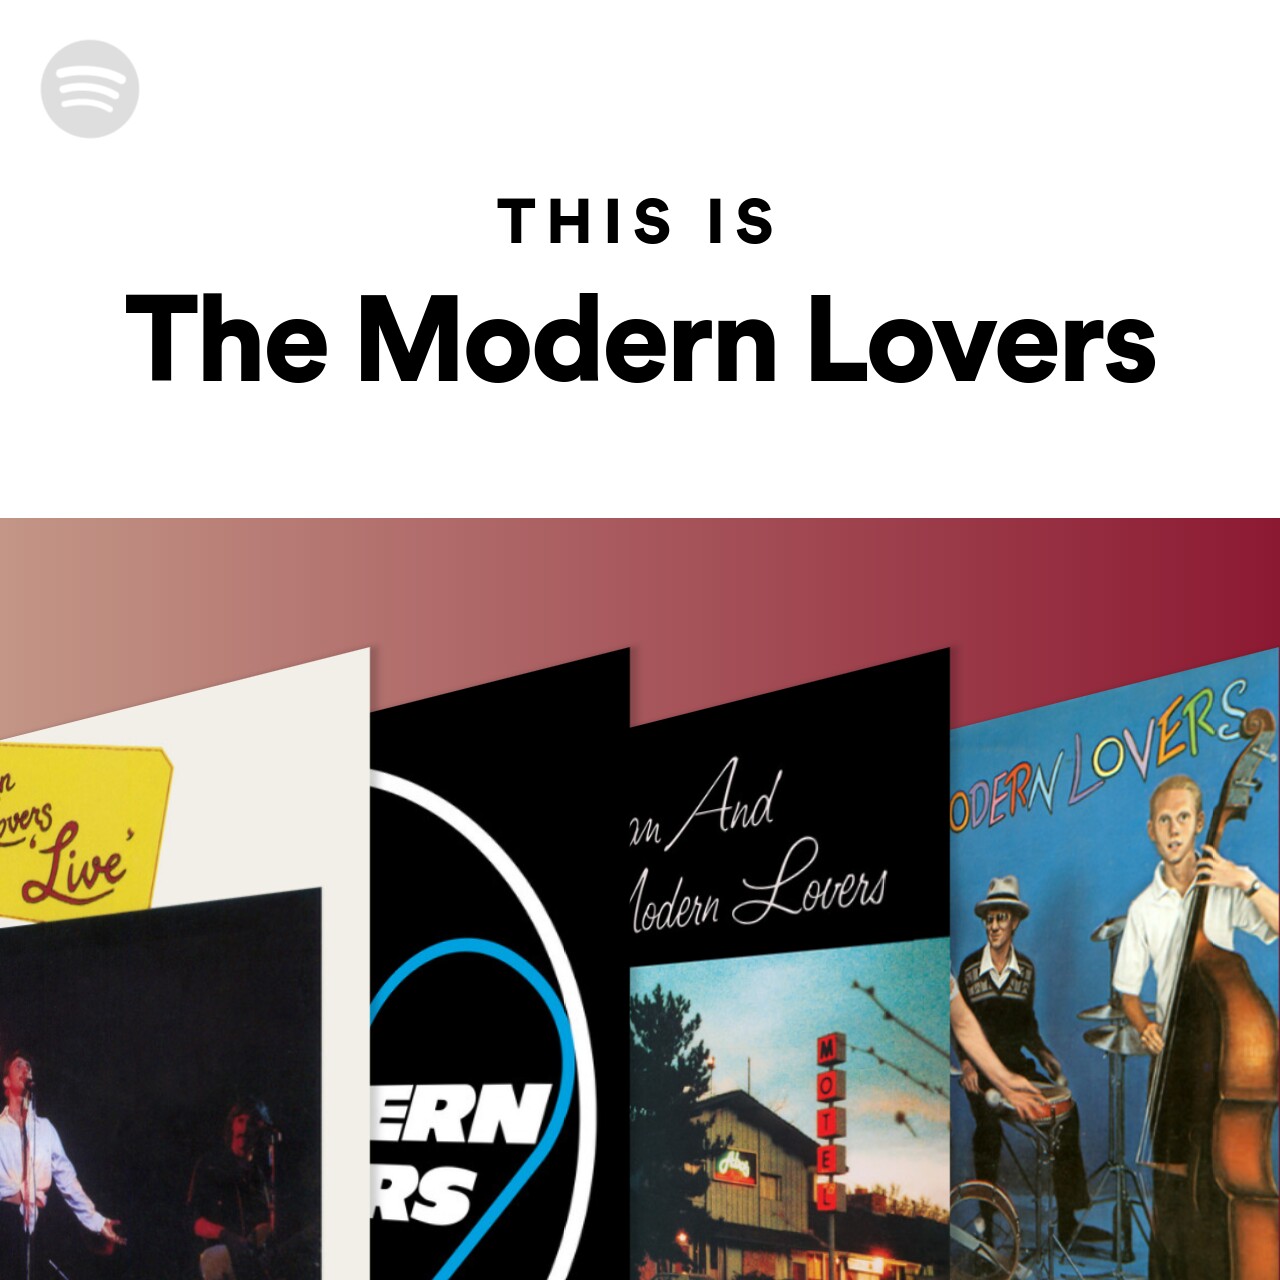 This Is The Modern Lovers